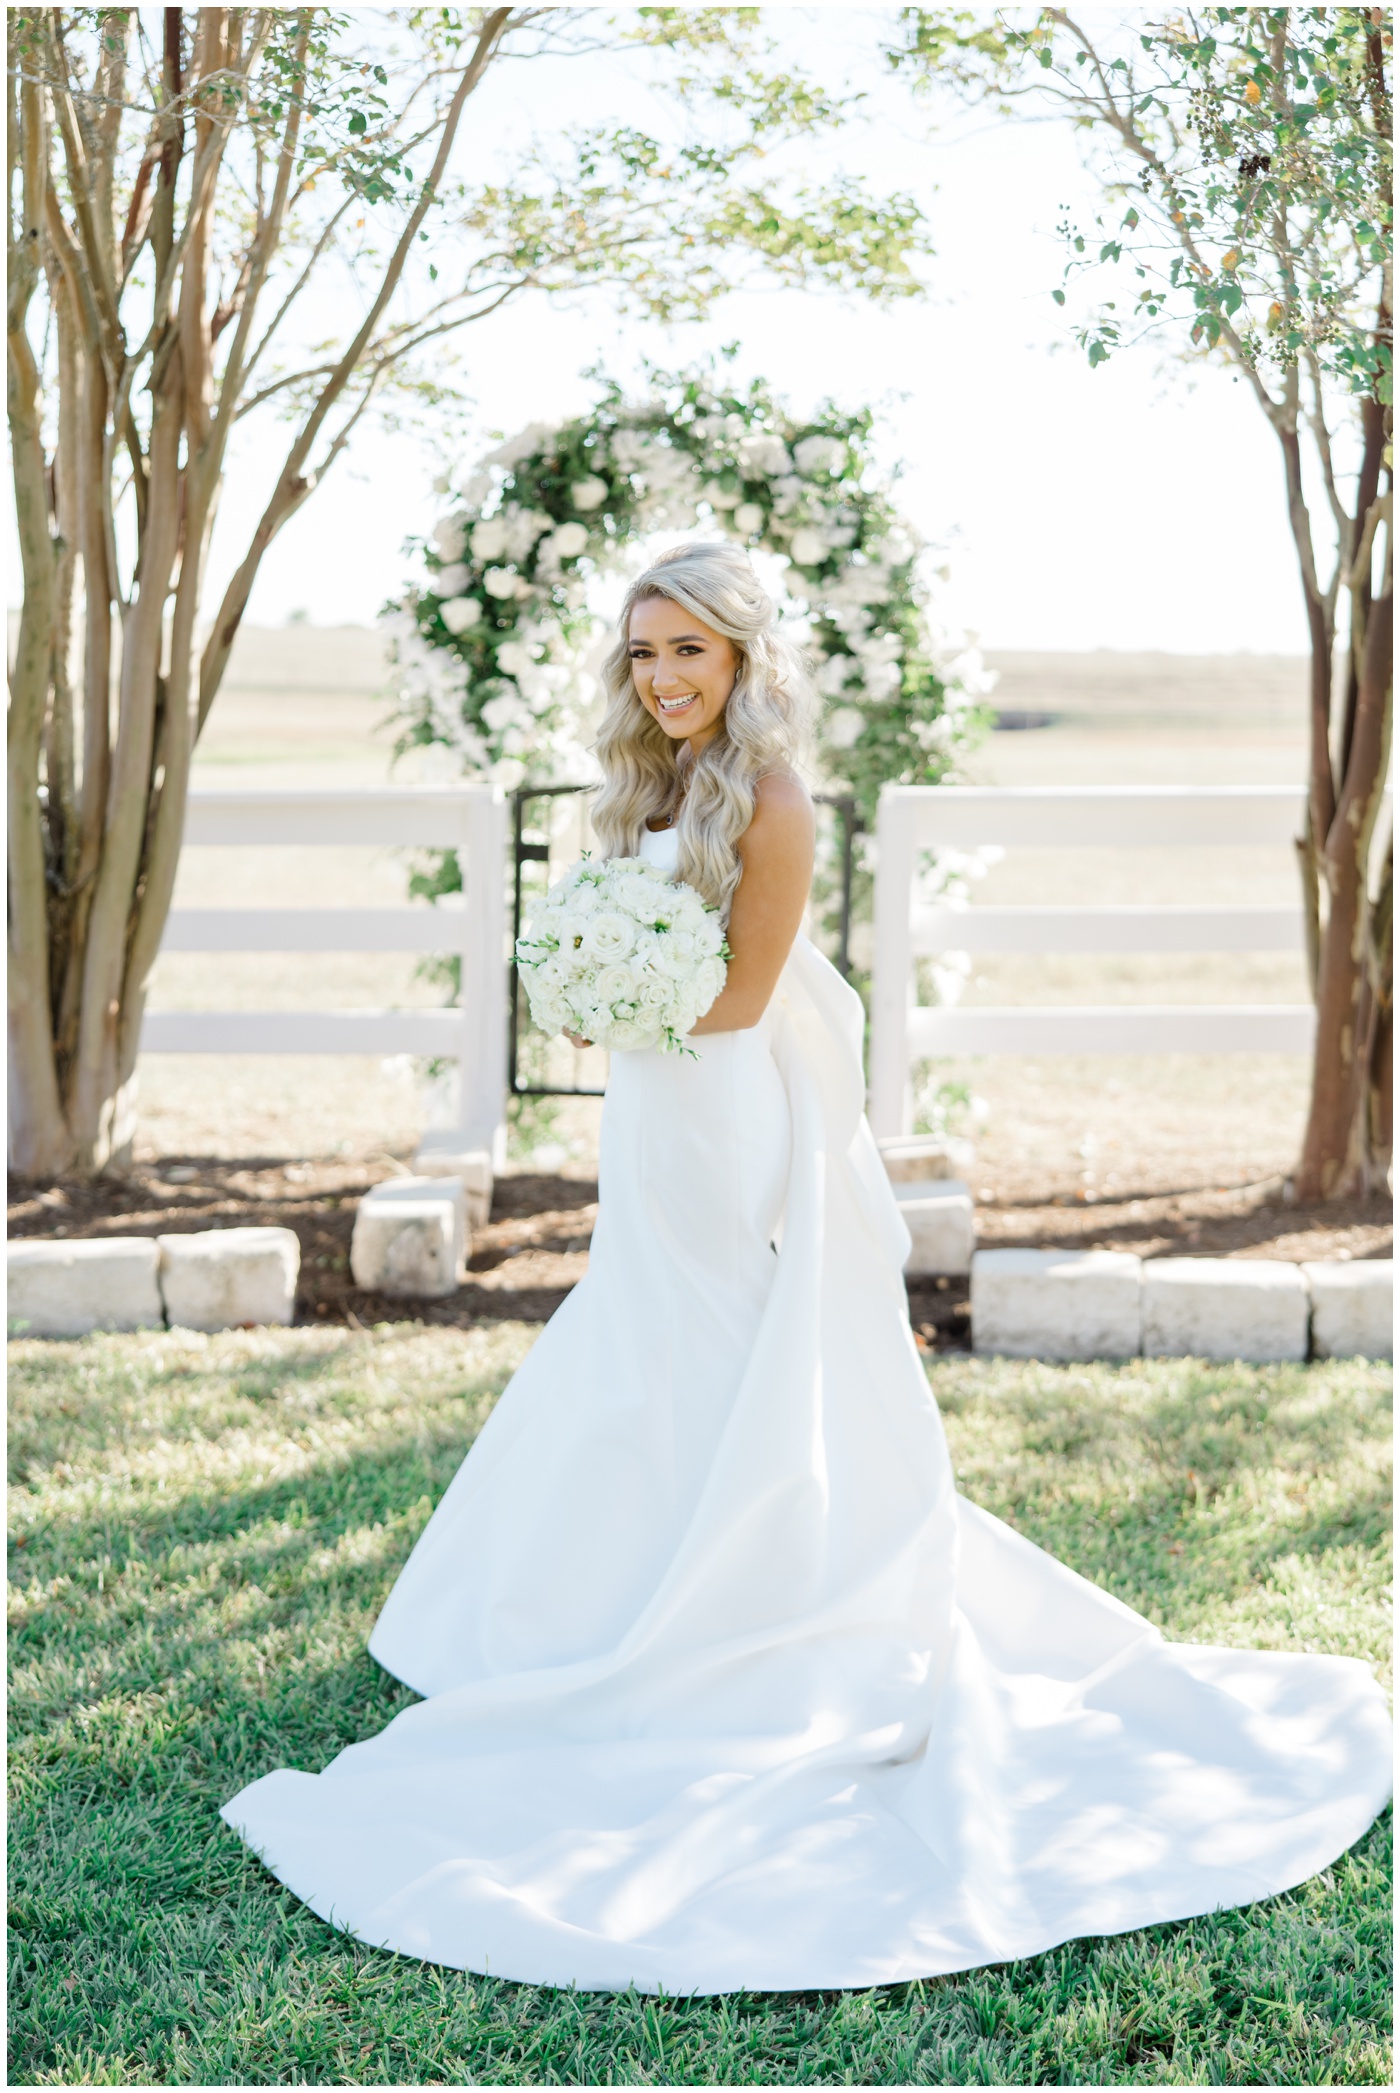 Wedding Photographer in Houston | A bride smiles on her wedding day